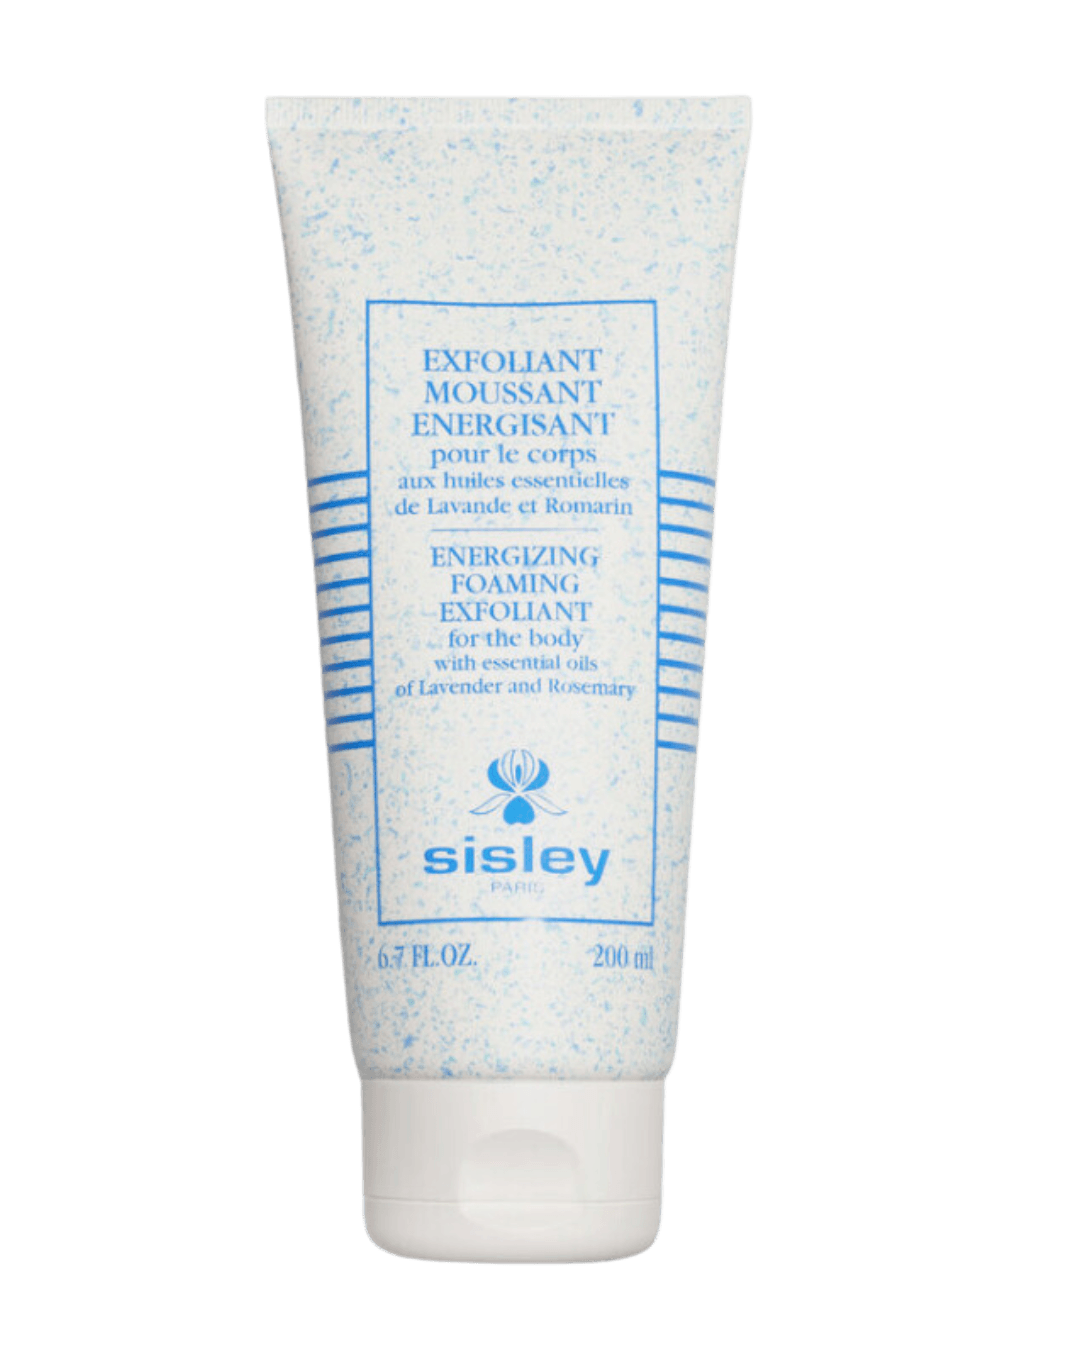 Daily Vanity Beauty Awards 2024 Best  Sisley Paris Energising Foaming Exfoliant For The Body Voted By Beauty Experts